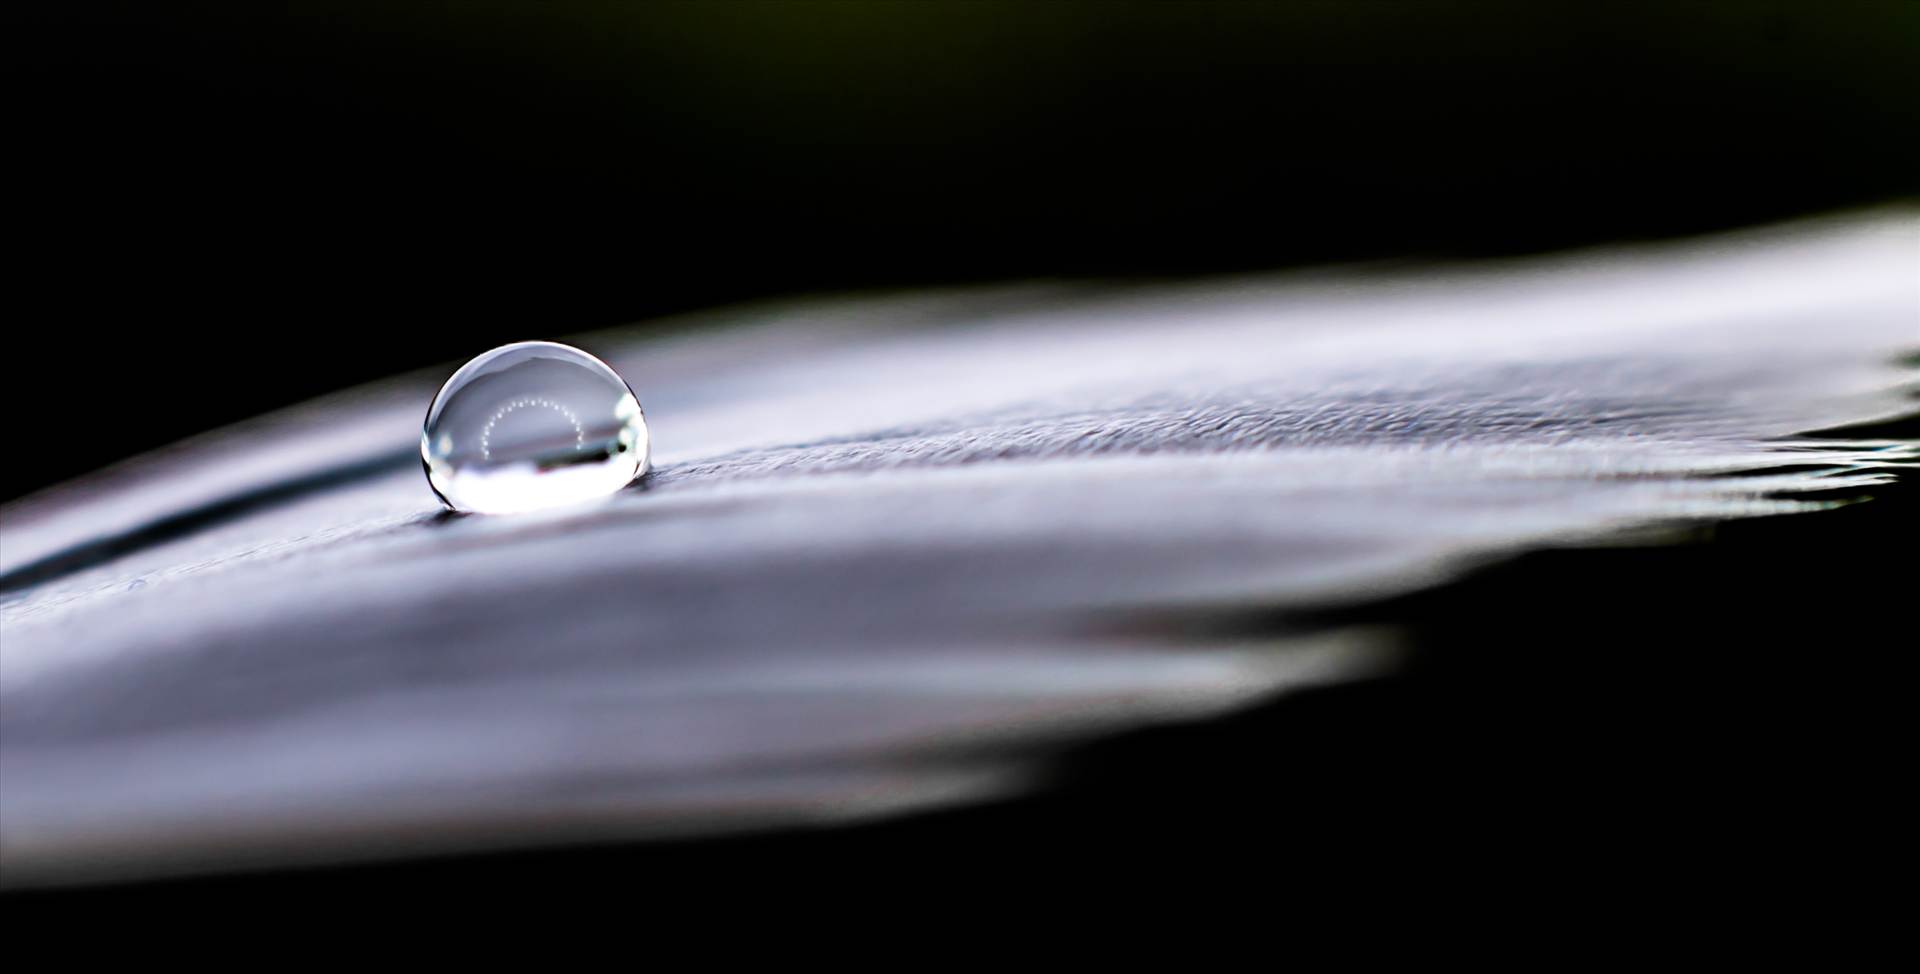 Droplet and feather.jpg  by WPC-187